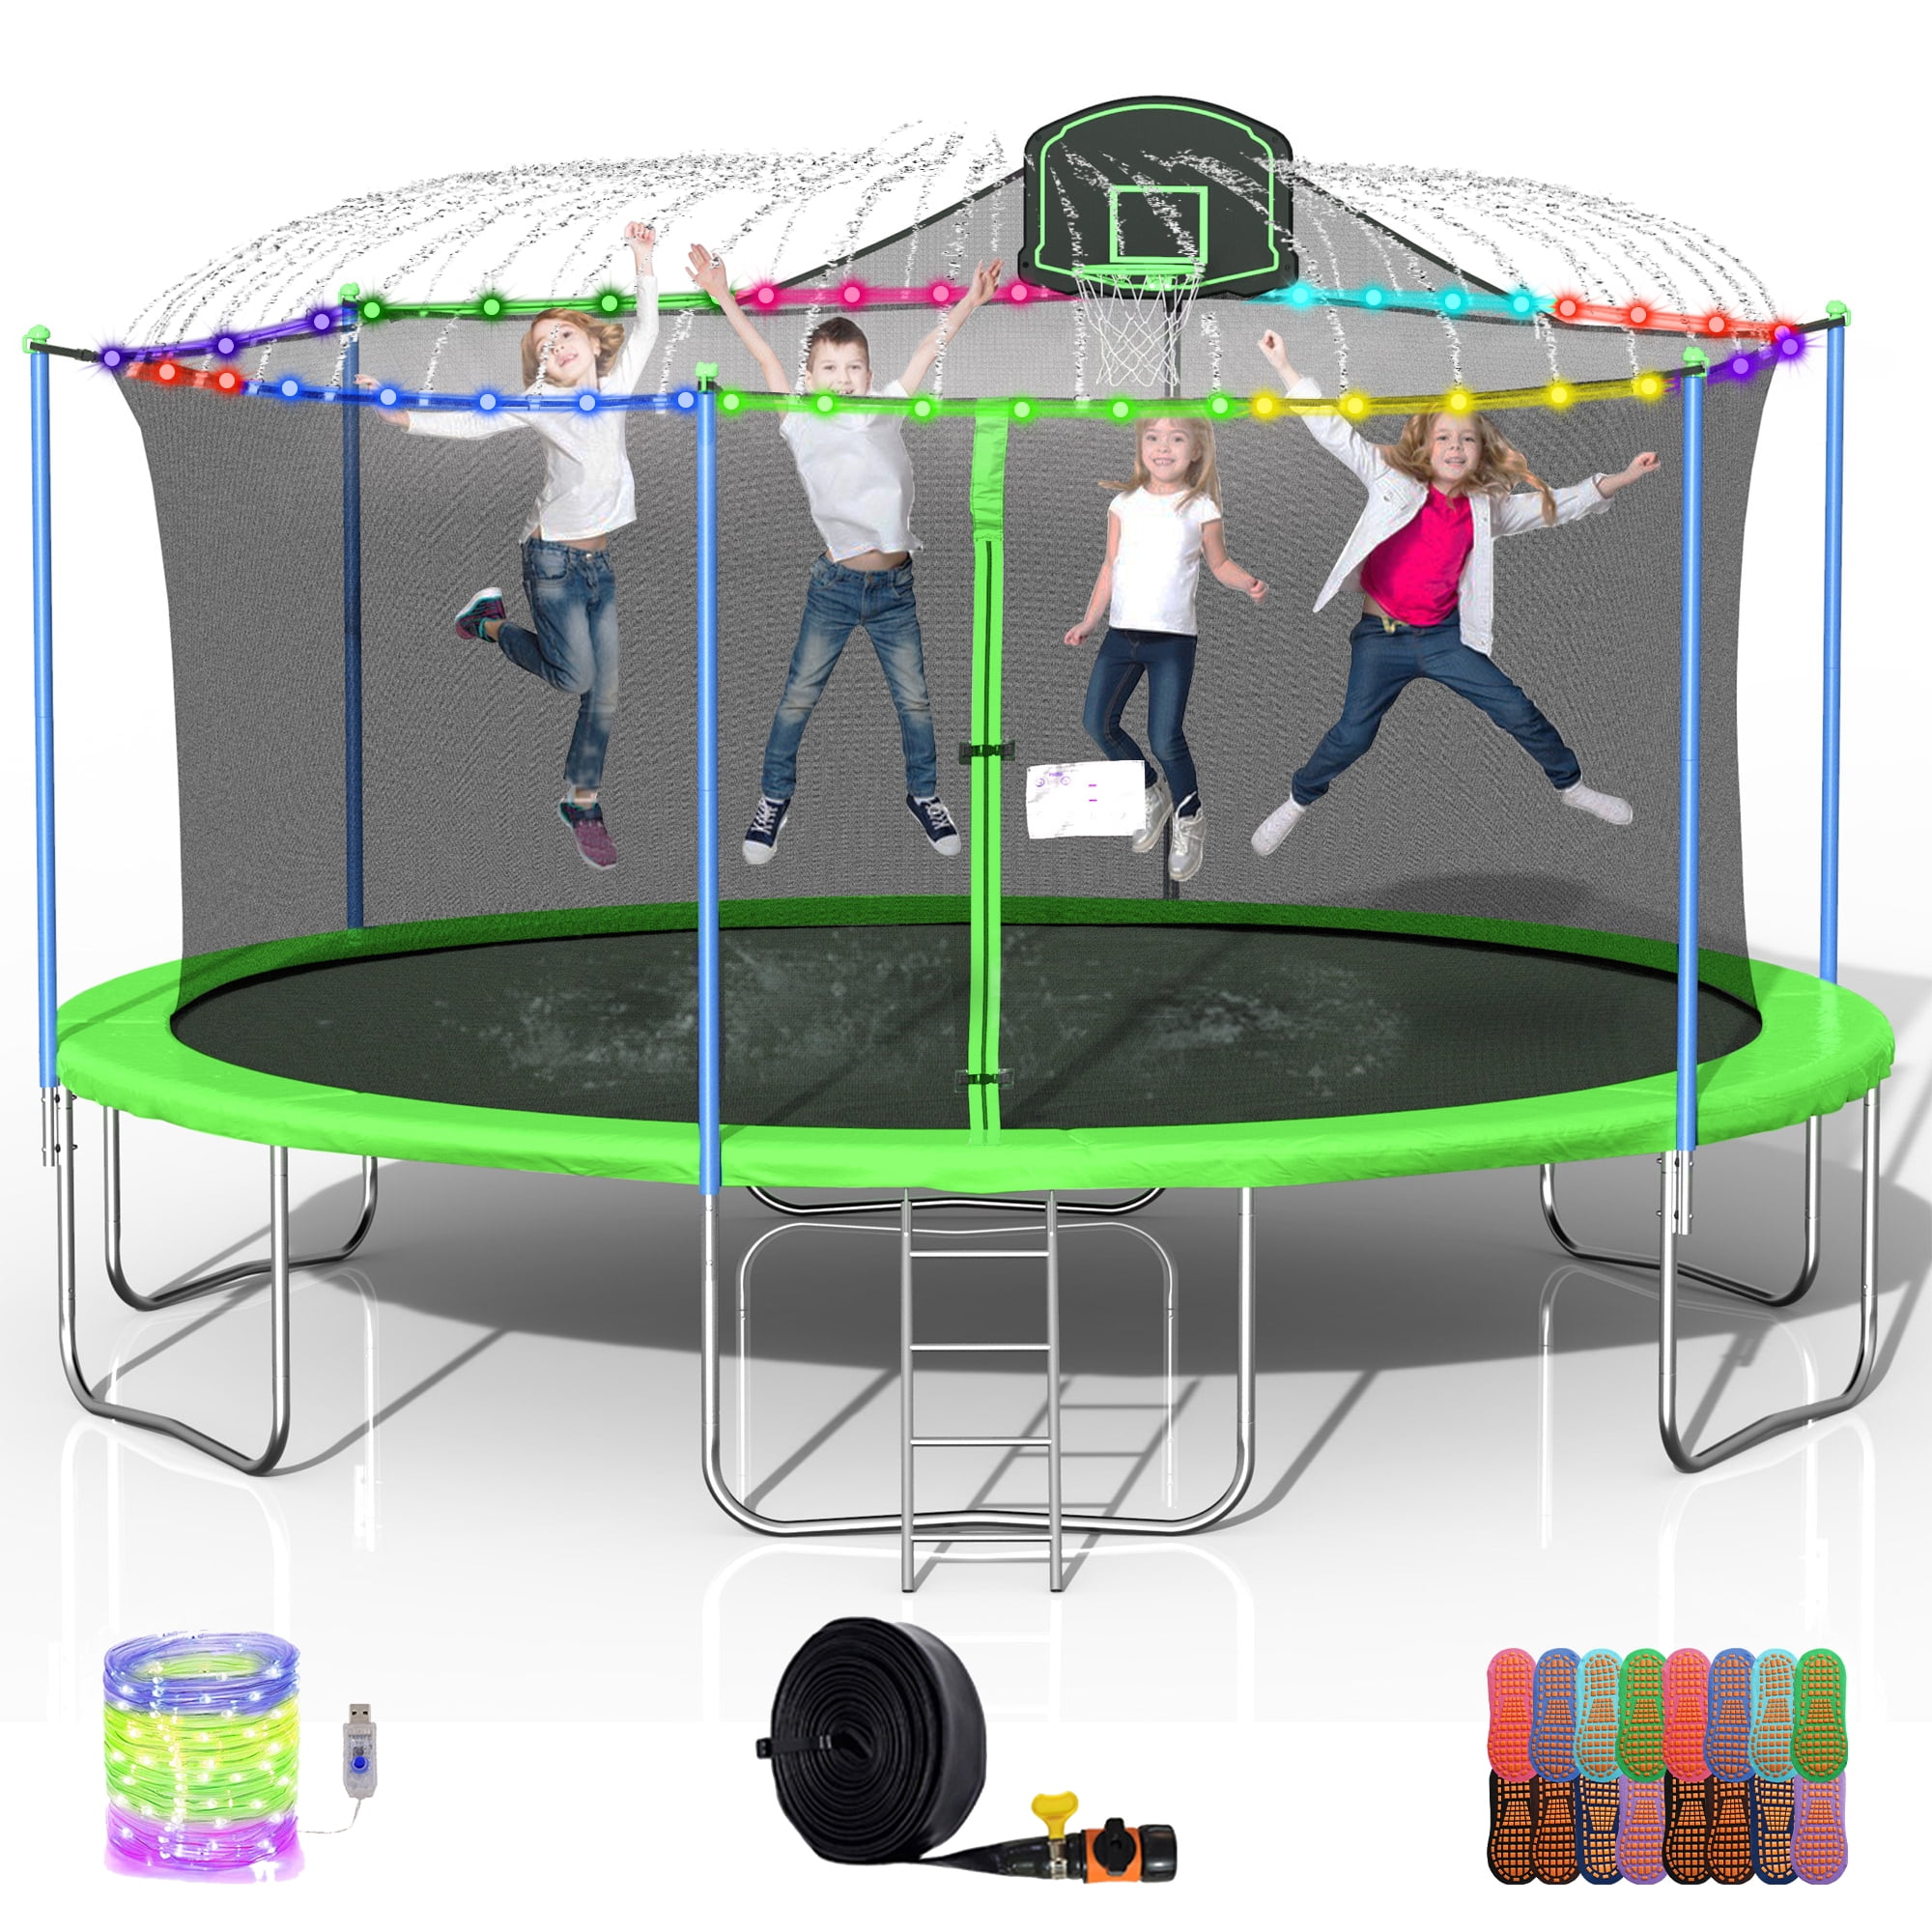 DreamBuck 16FT Trampoline Adults Kids, 1500LBS No-Gap Design - ASTM Approved, Outdoor Backyard with Basketball Hoop, Enclosure, Sprinkler, Light and Socks, for Happy Family Time, Green - Walmart.com